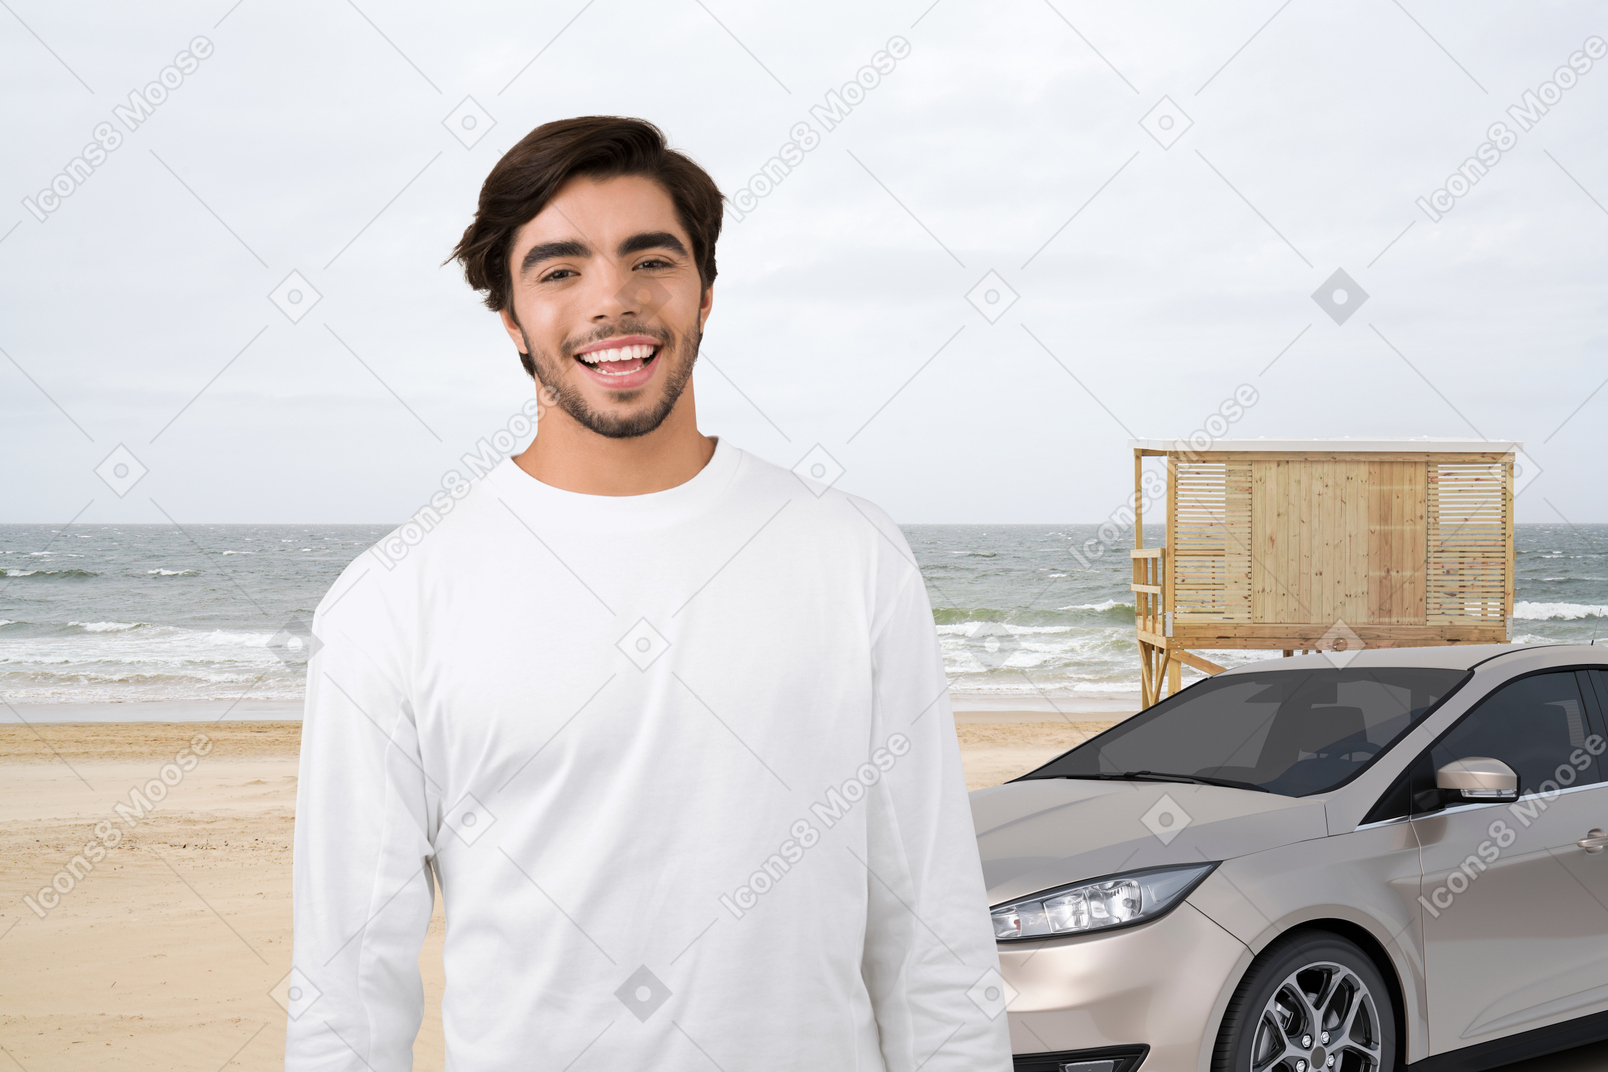 A man standing next to his car